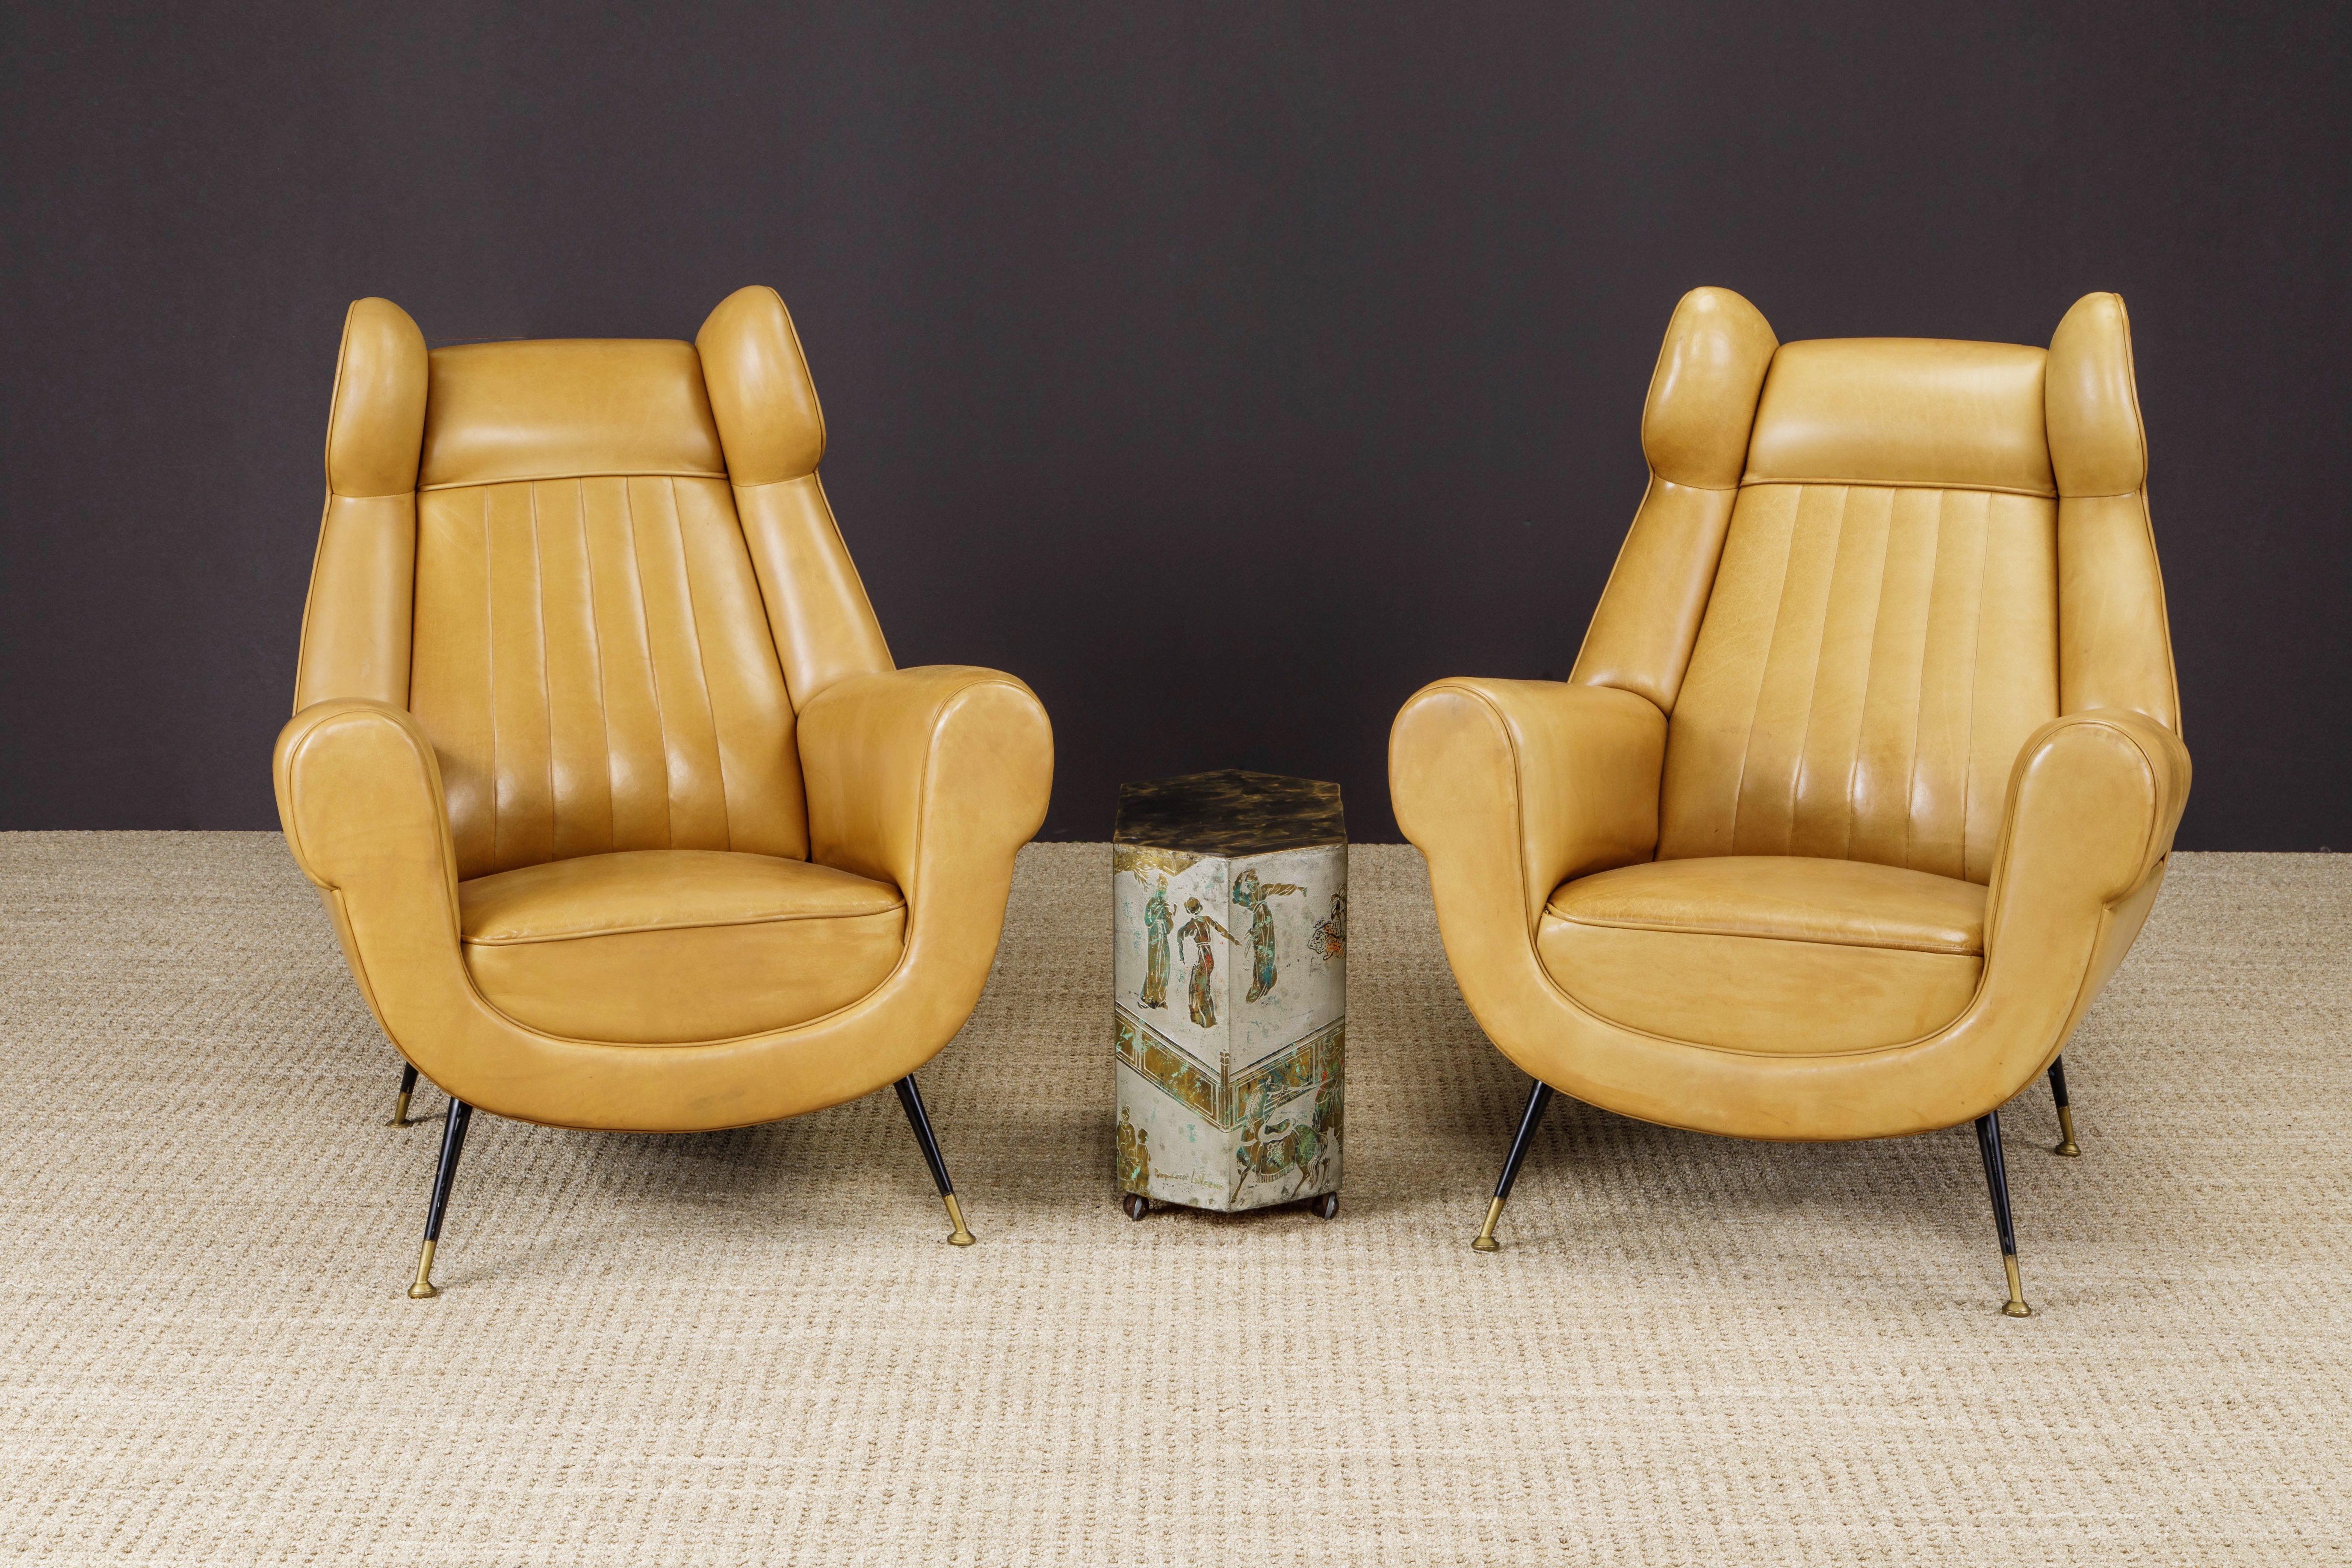 Pair of Gigi Radice for Minotti Leather Wingback Lounge Chairs, Italy, c. 1950s 12